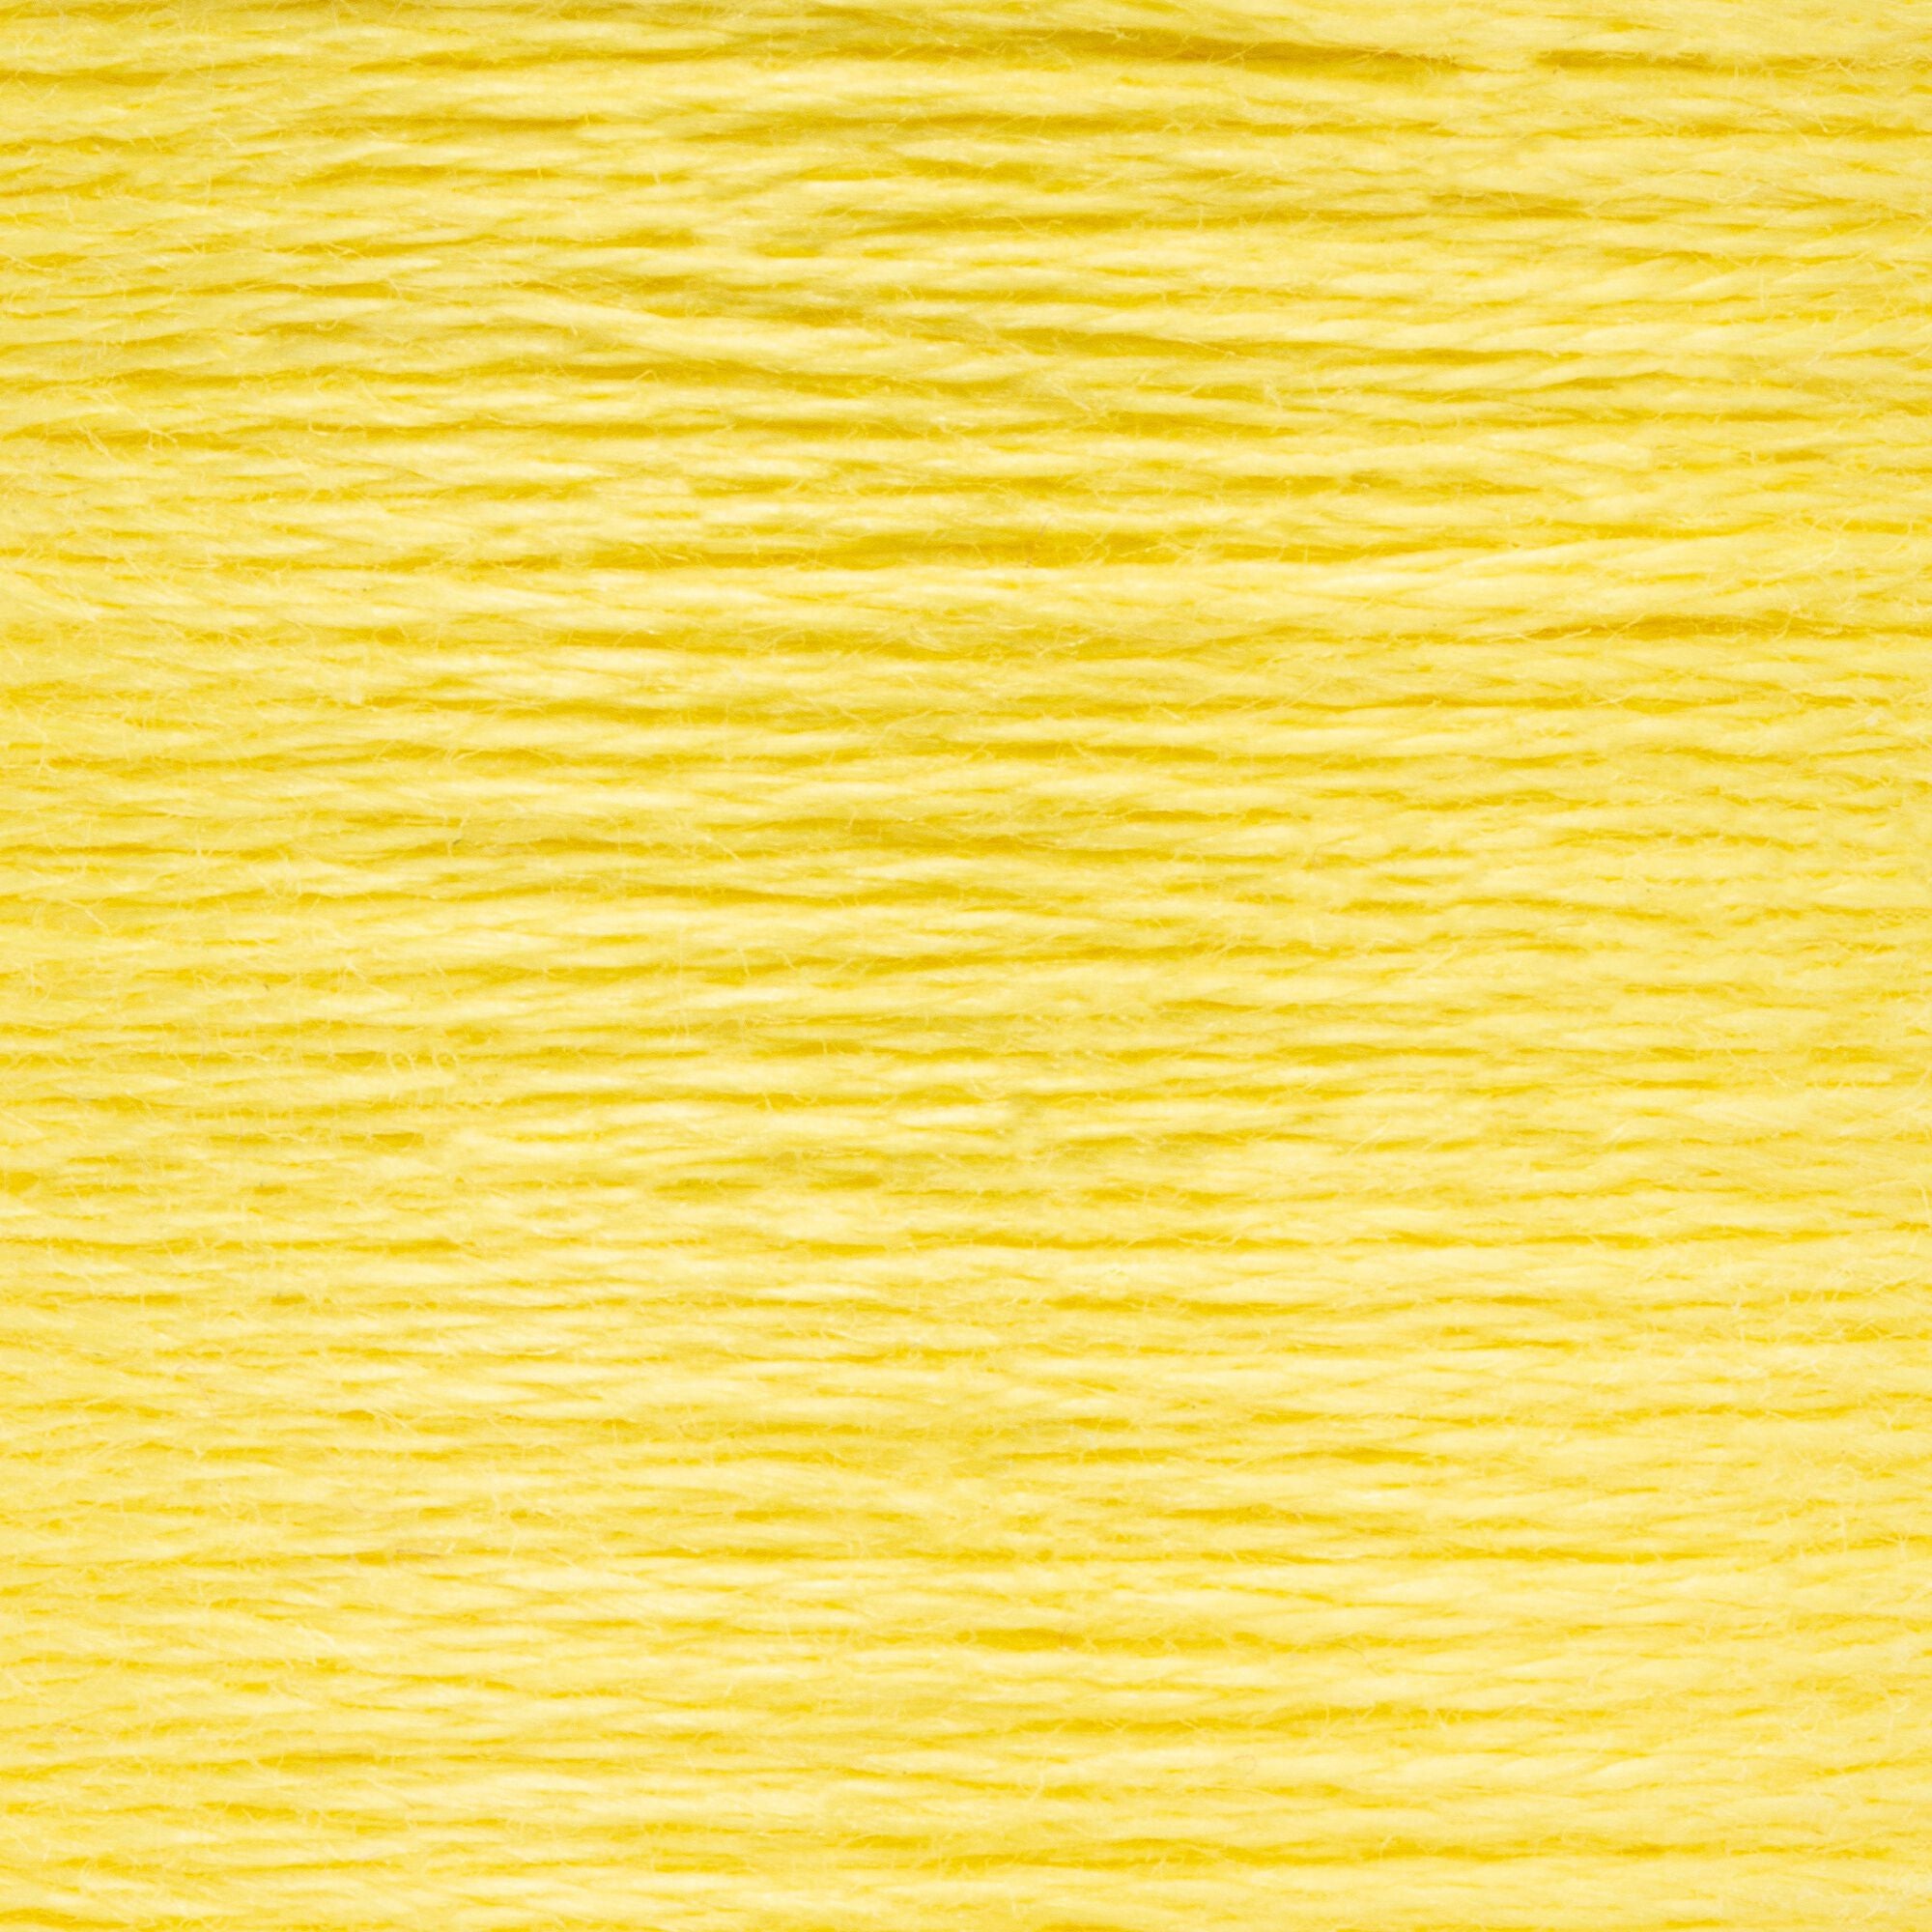 Anchor Embroidery Floss in Canary Yellow Lt